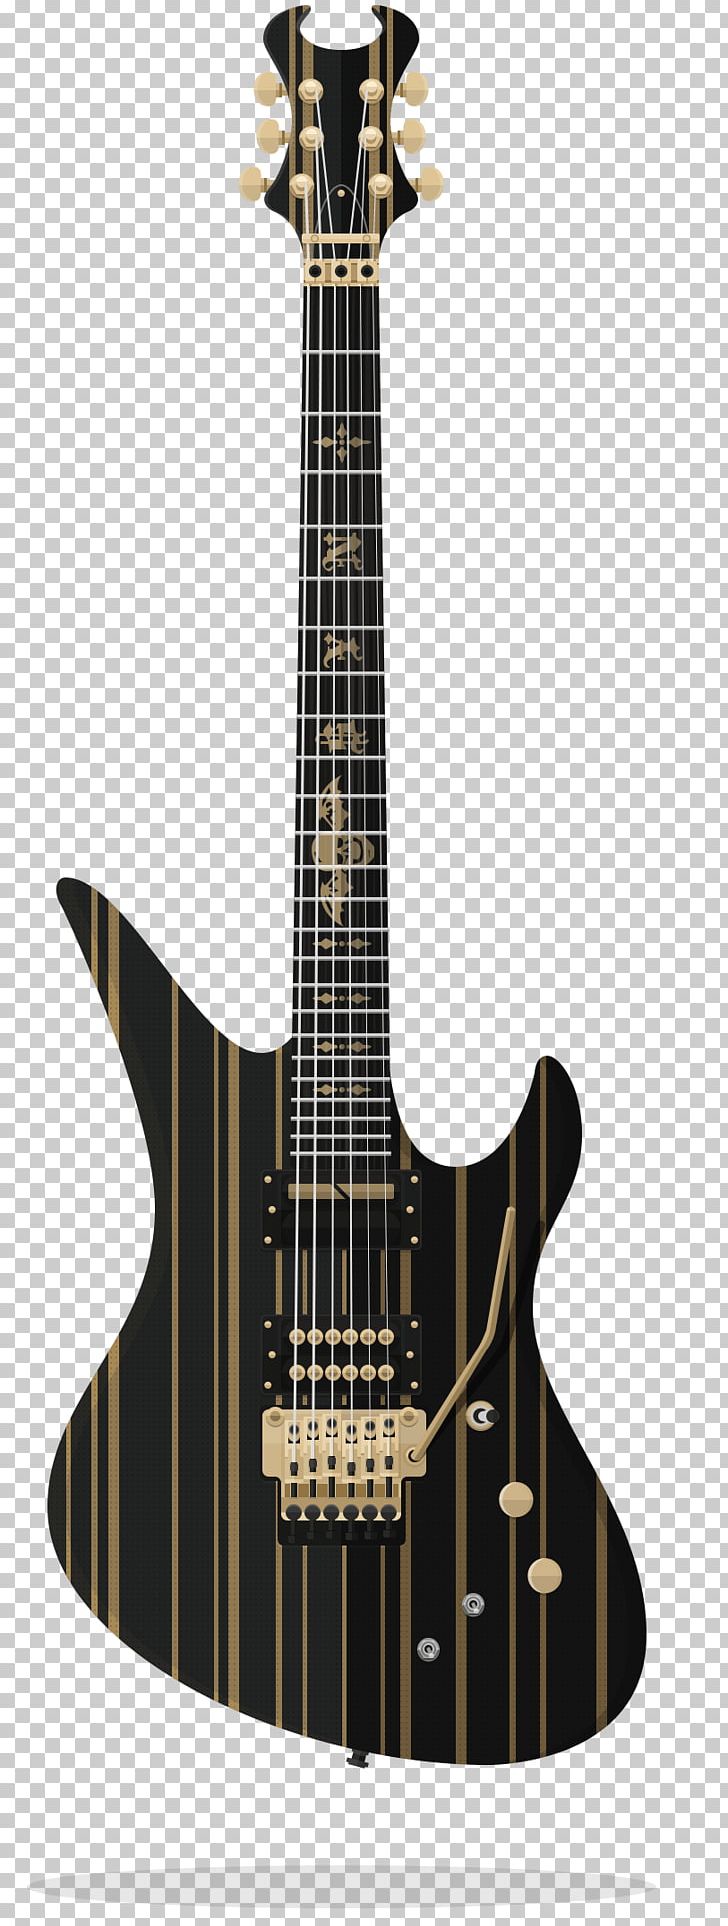 Schecter Guitar Research Schecter Synyster Standard Electric Guitar Solid Body PNG, Clipart, Guitar Accessory, Guitarist, Musician, Objects, Pickup Free PNG Download